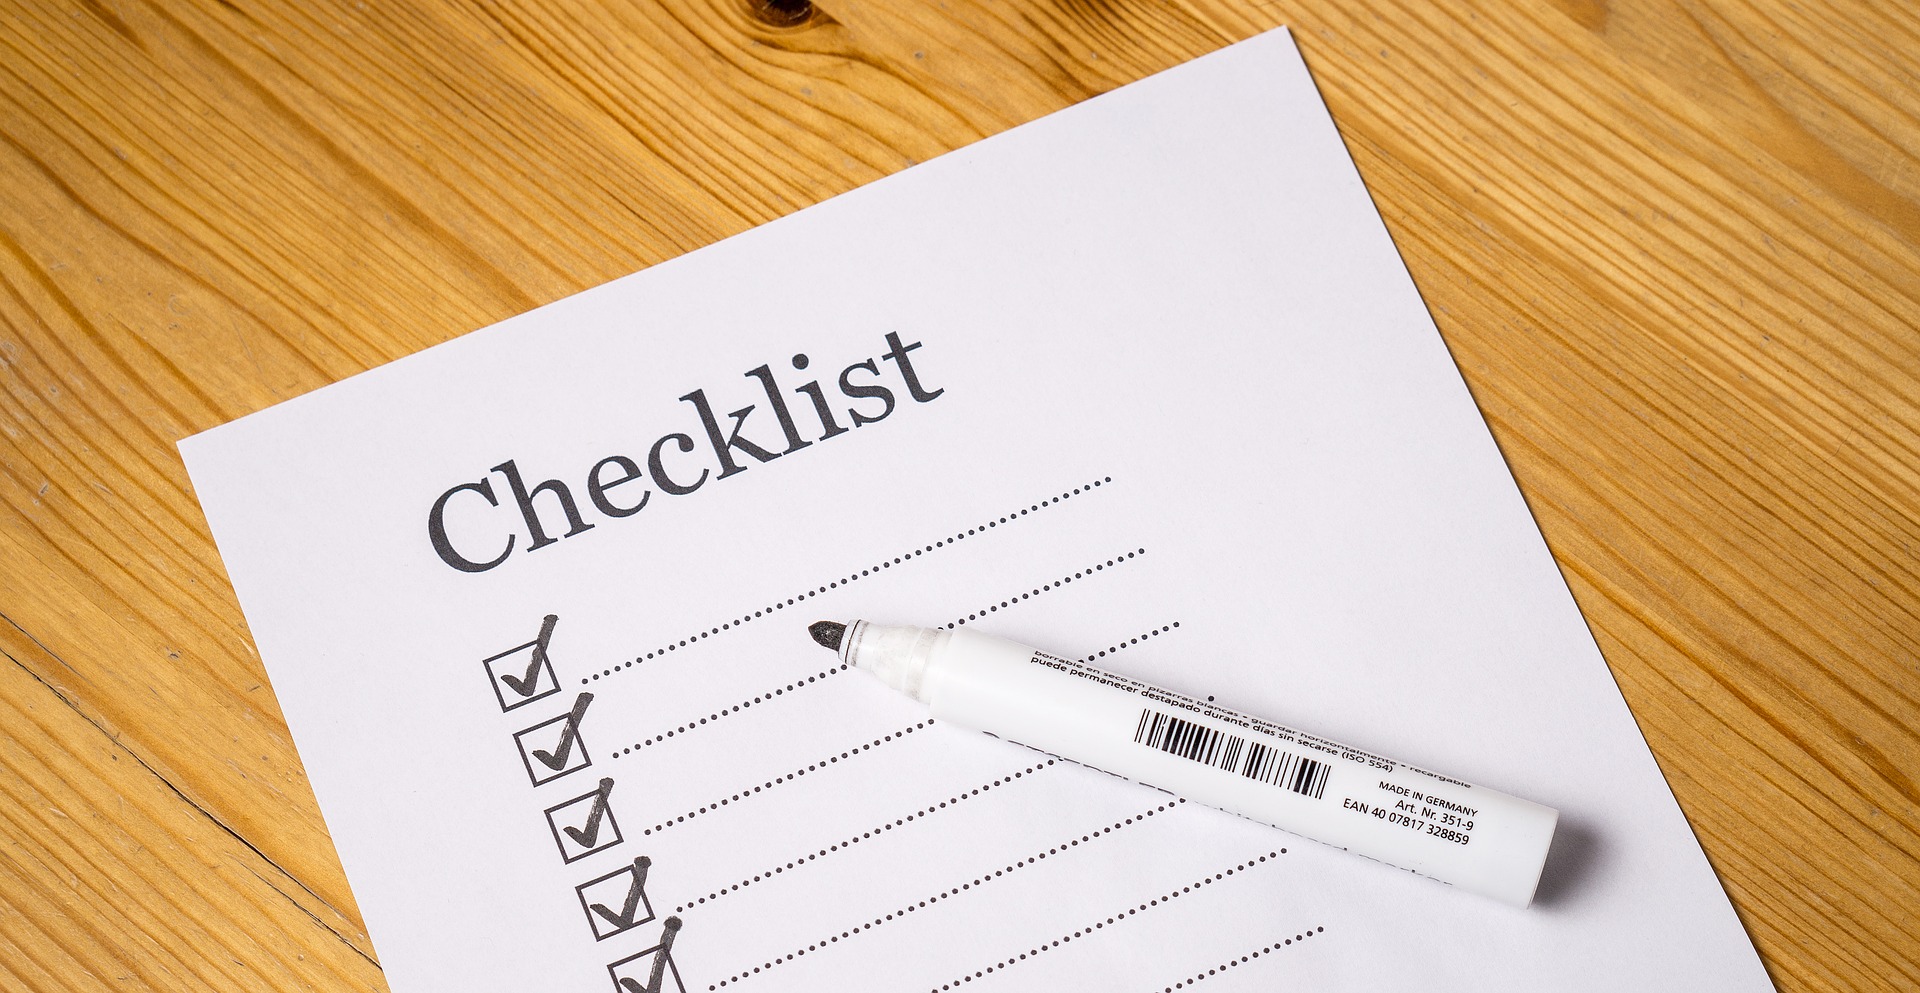 Checklist and pen. Making a checklist for your IBLCE Exam application helps plan ahead.